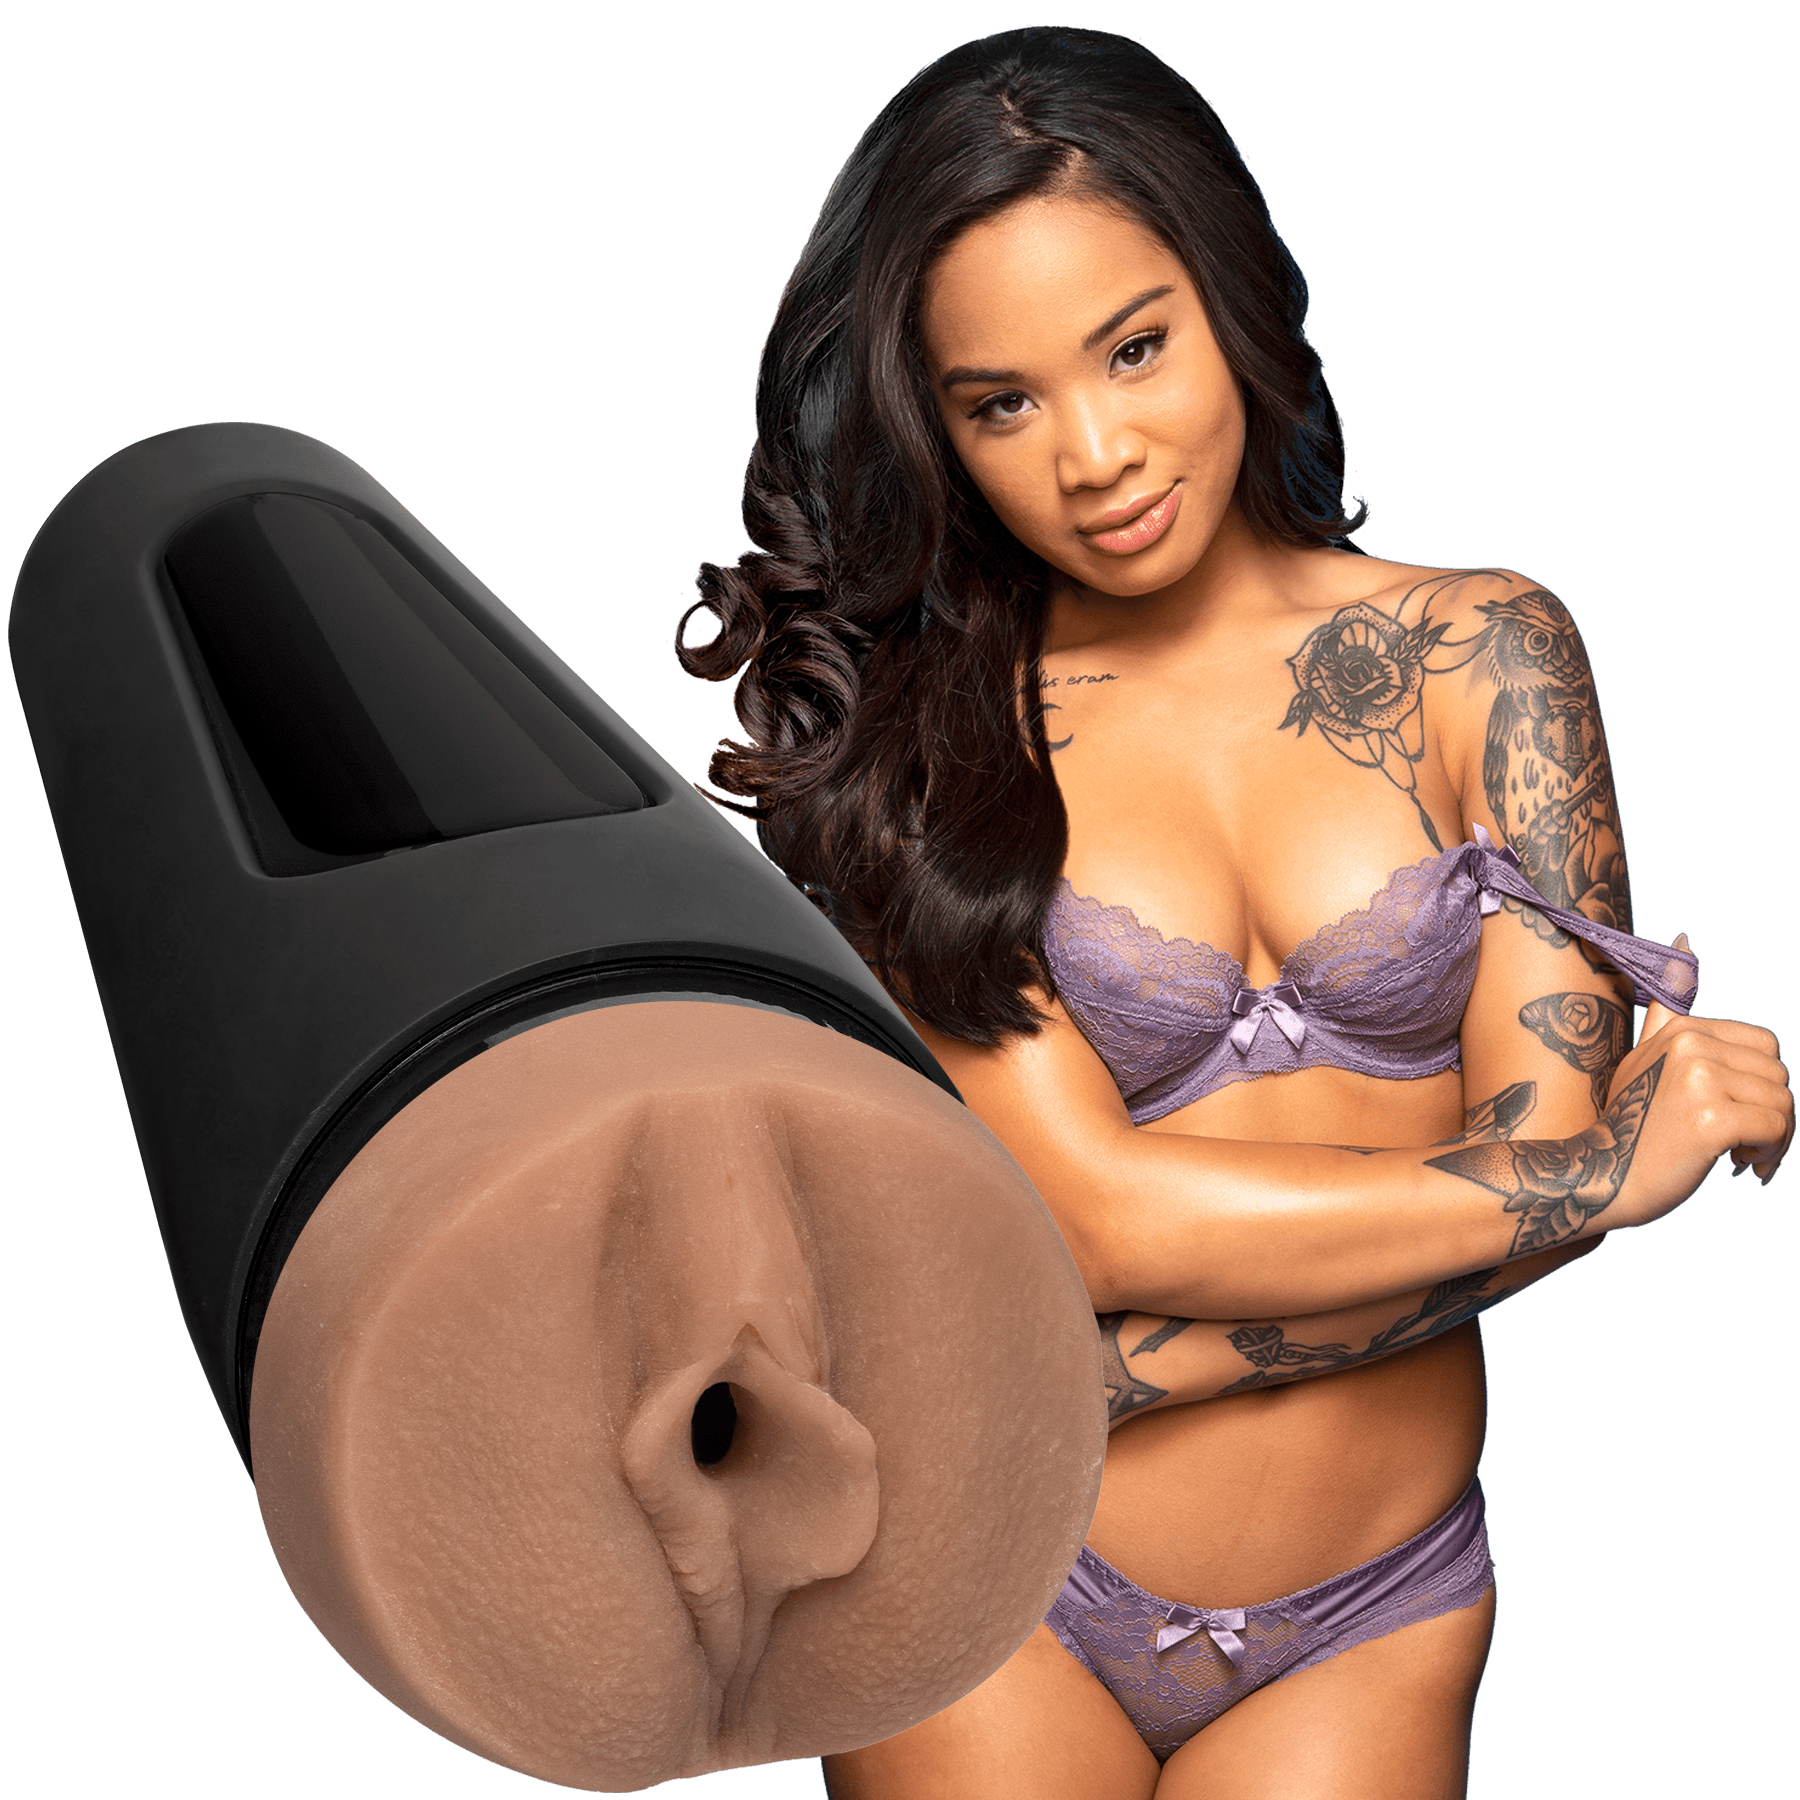 Doc Johnson Main Squeeze Honey Gold Ultraskyn Pussy - Buy At Luxury Toy X - Free 3-Day Shipping